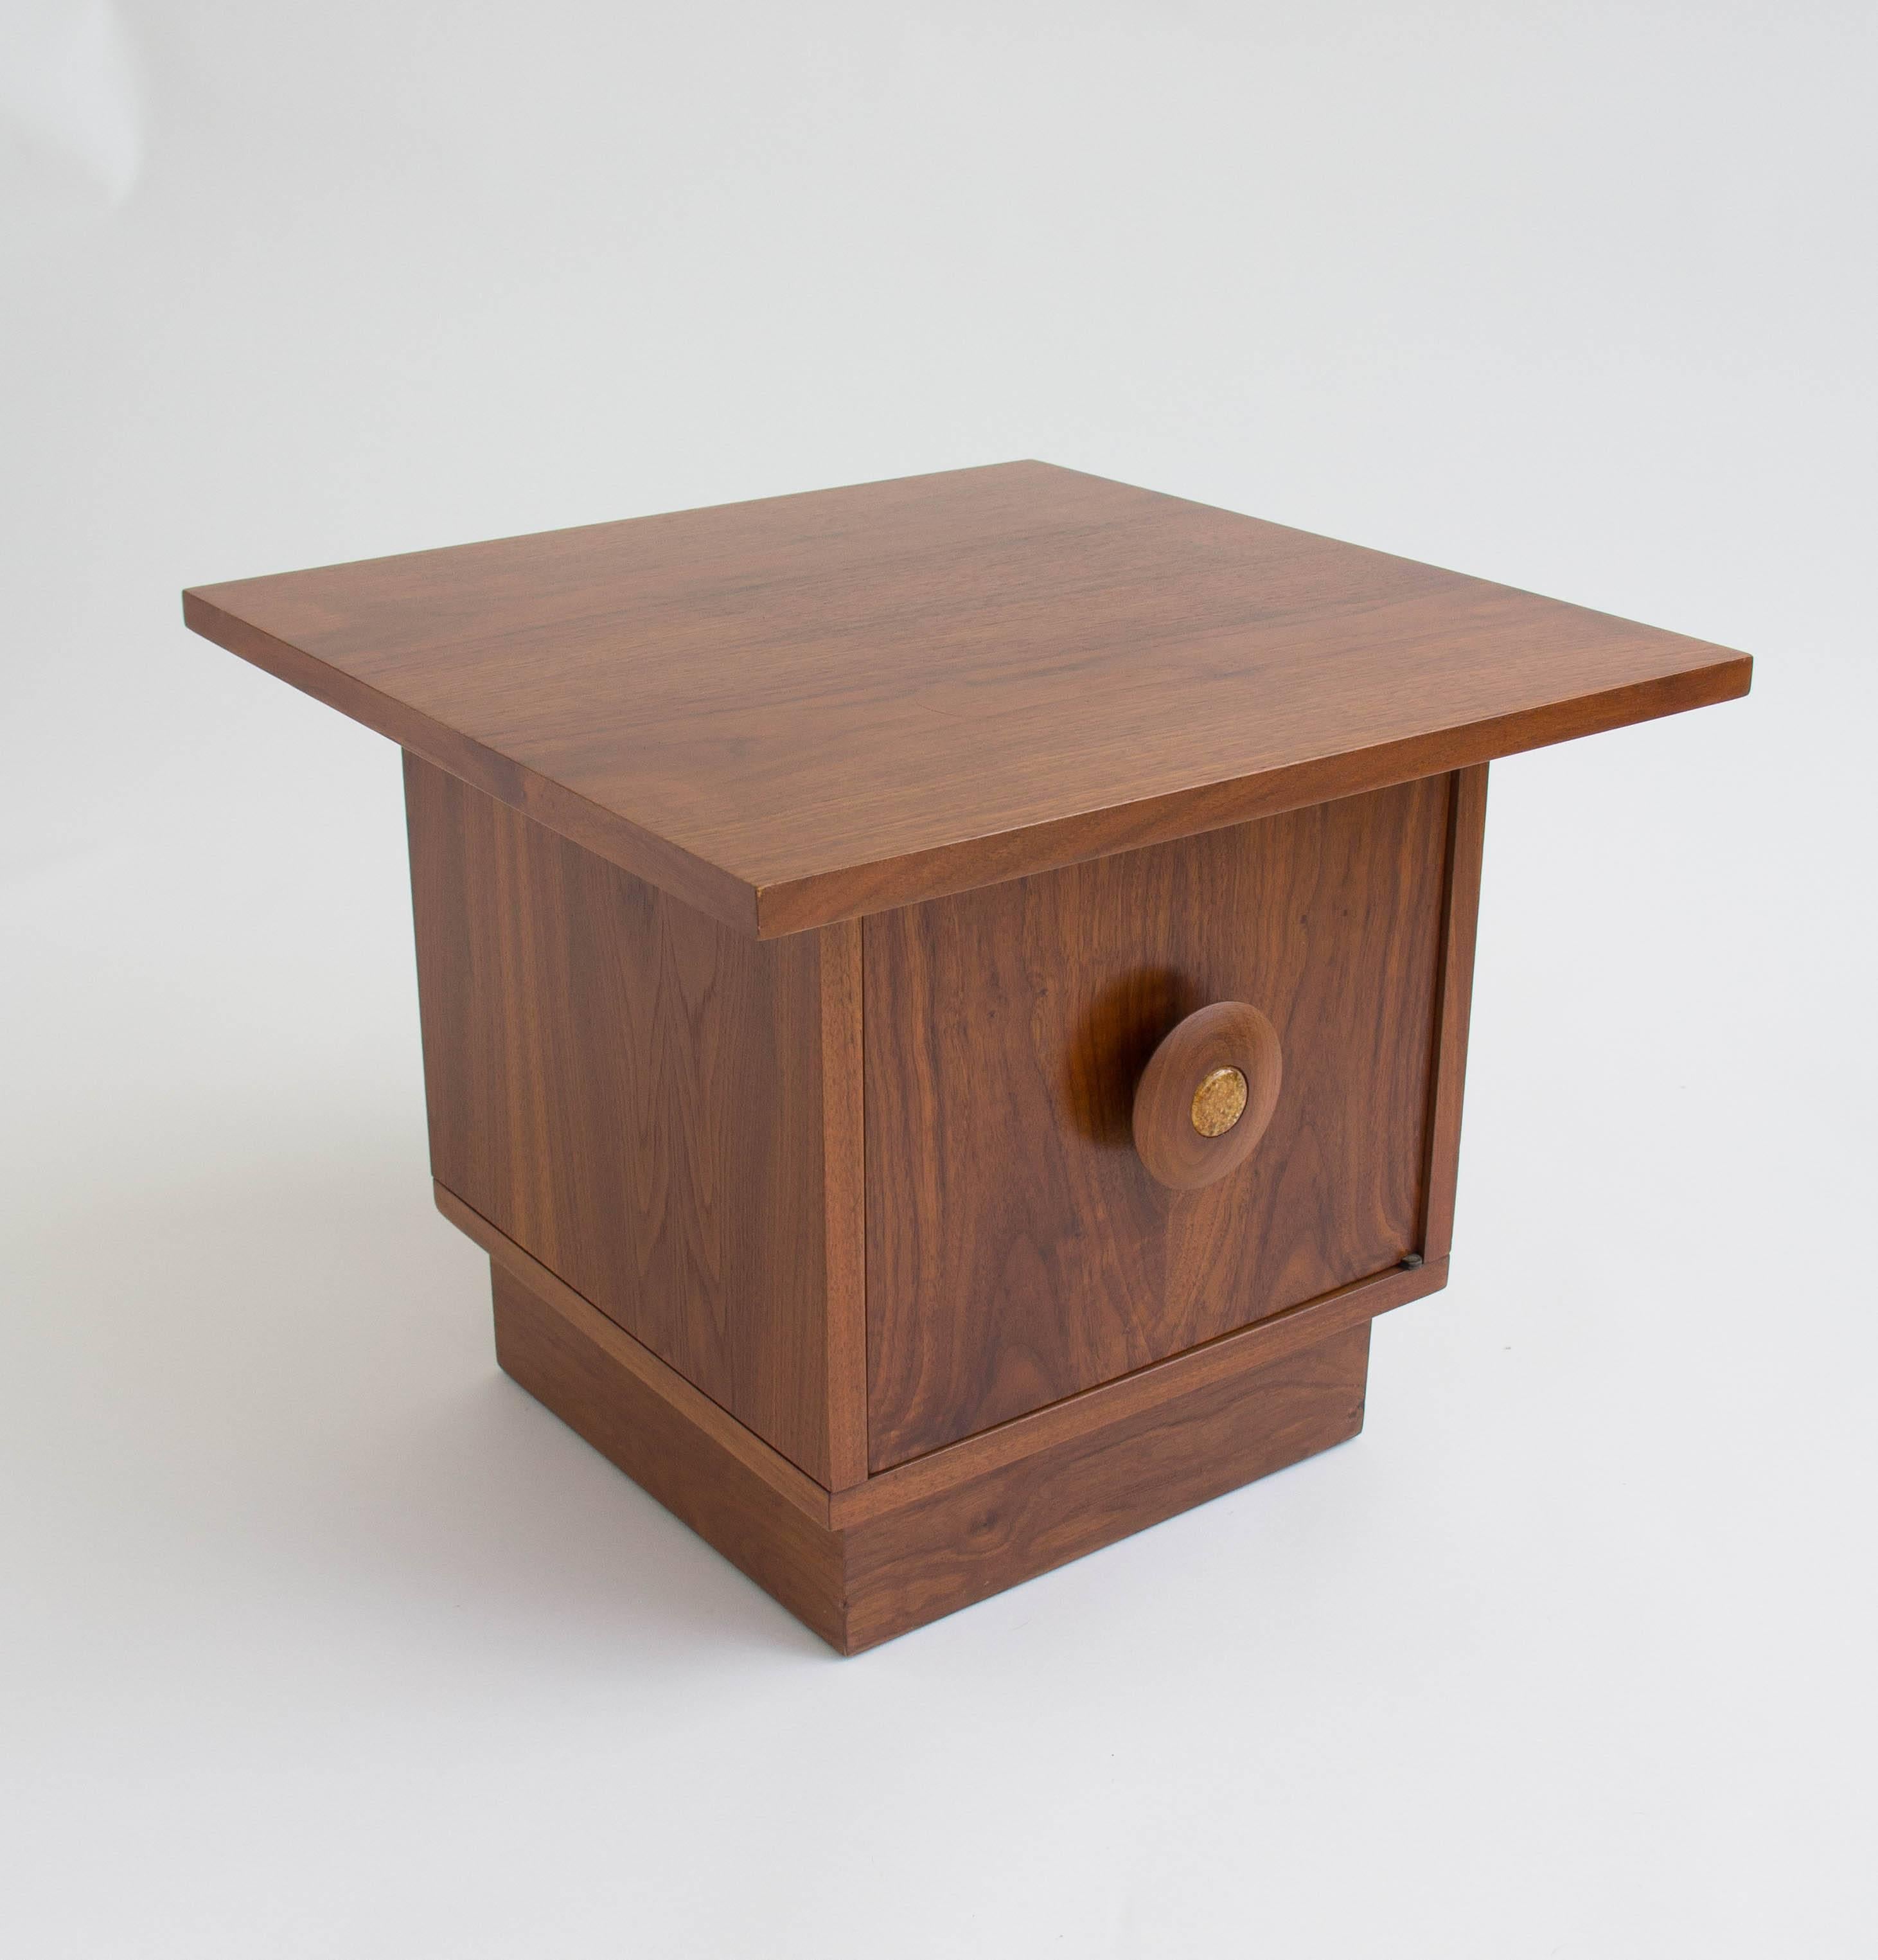 A pair of pedestal nightstands or low occasional tables in walnut by John Keal for Brown Saltman. Each piece has a square table top mounted on a pedestal with interior storage. The storage compartment opens with an oversized round knob, inlaid with